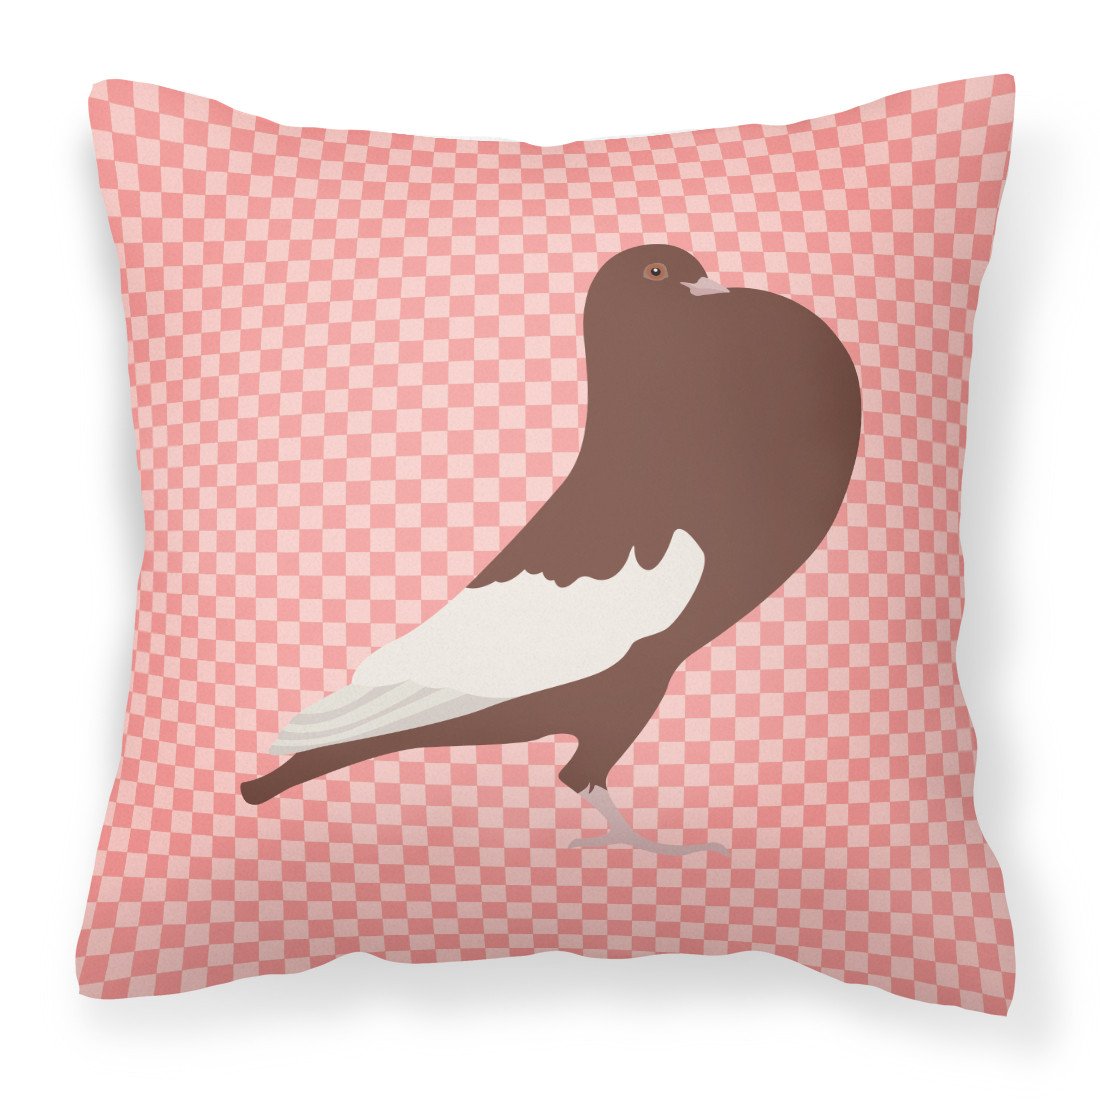 English Pouter Pigeon Pink Check Fabric Decorative Pillow BB7954PW1818 by Caroline's Treasures